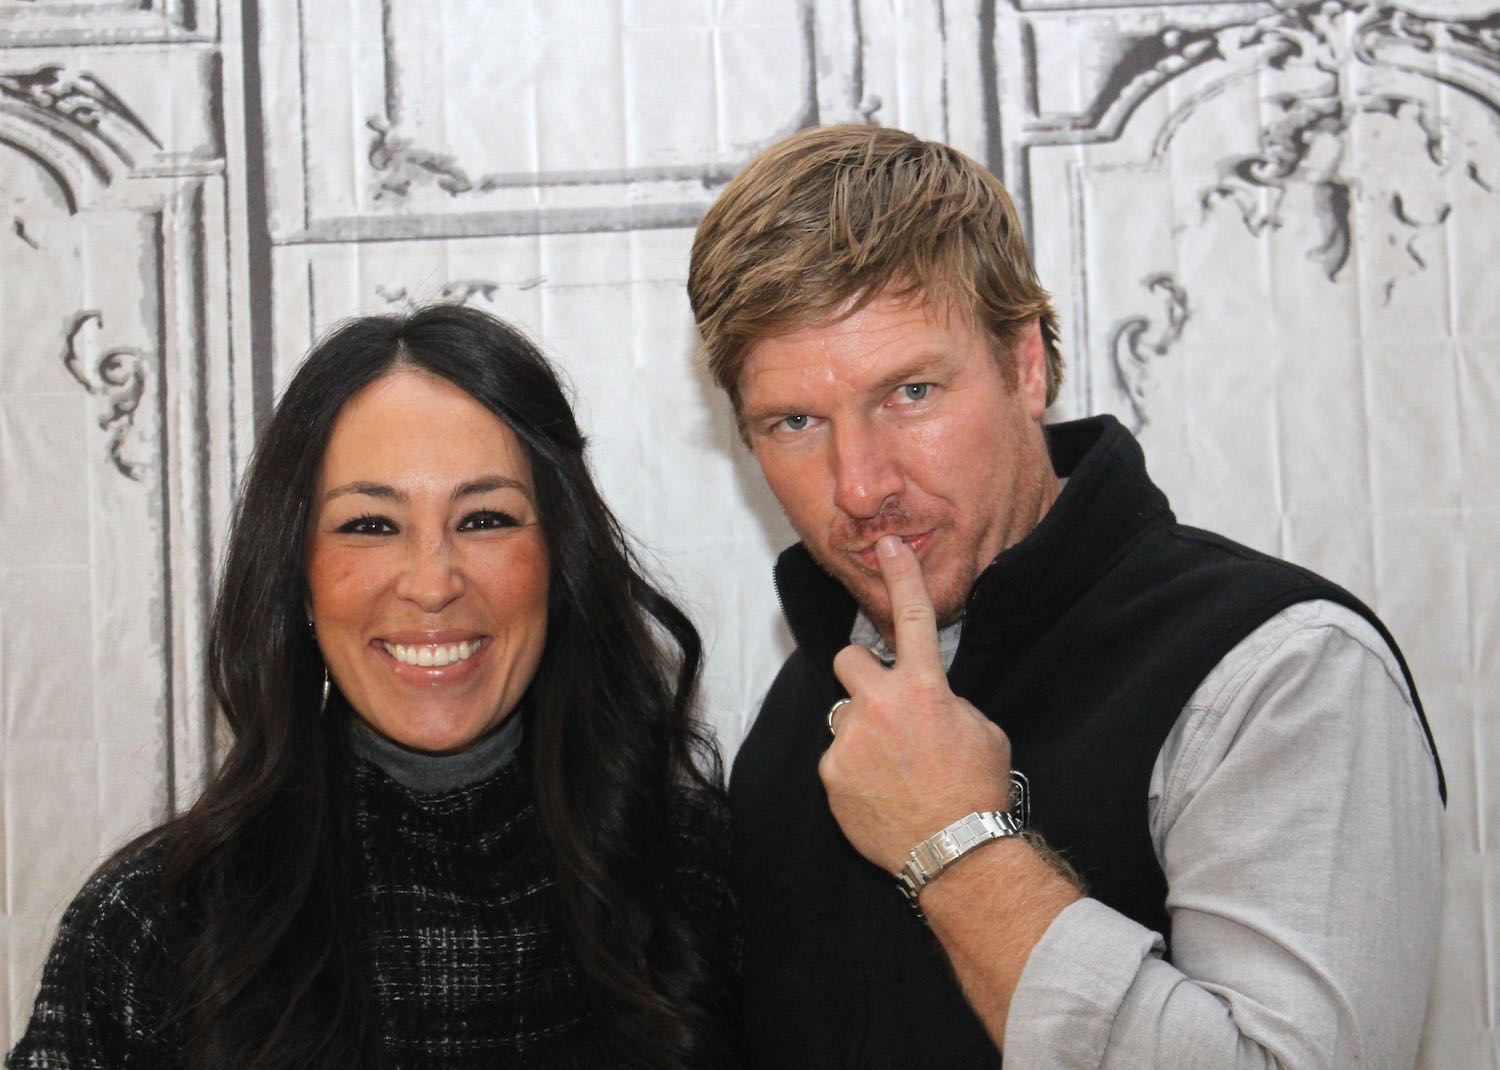 Joanna Gaines and Chip Gaines standing together and smiling